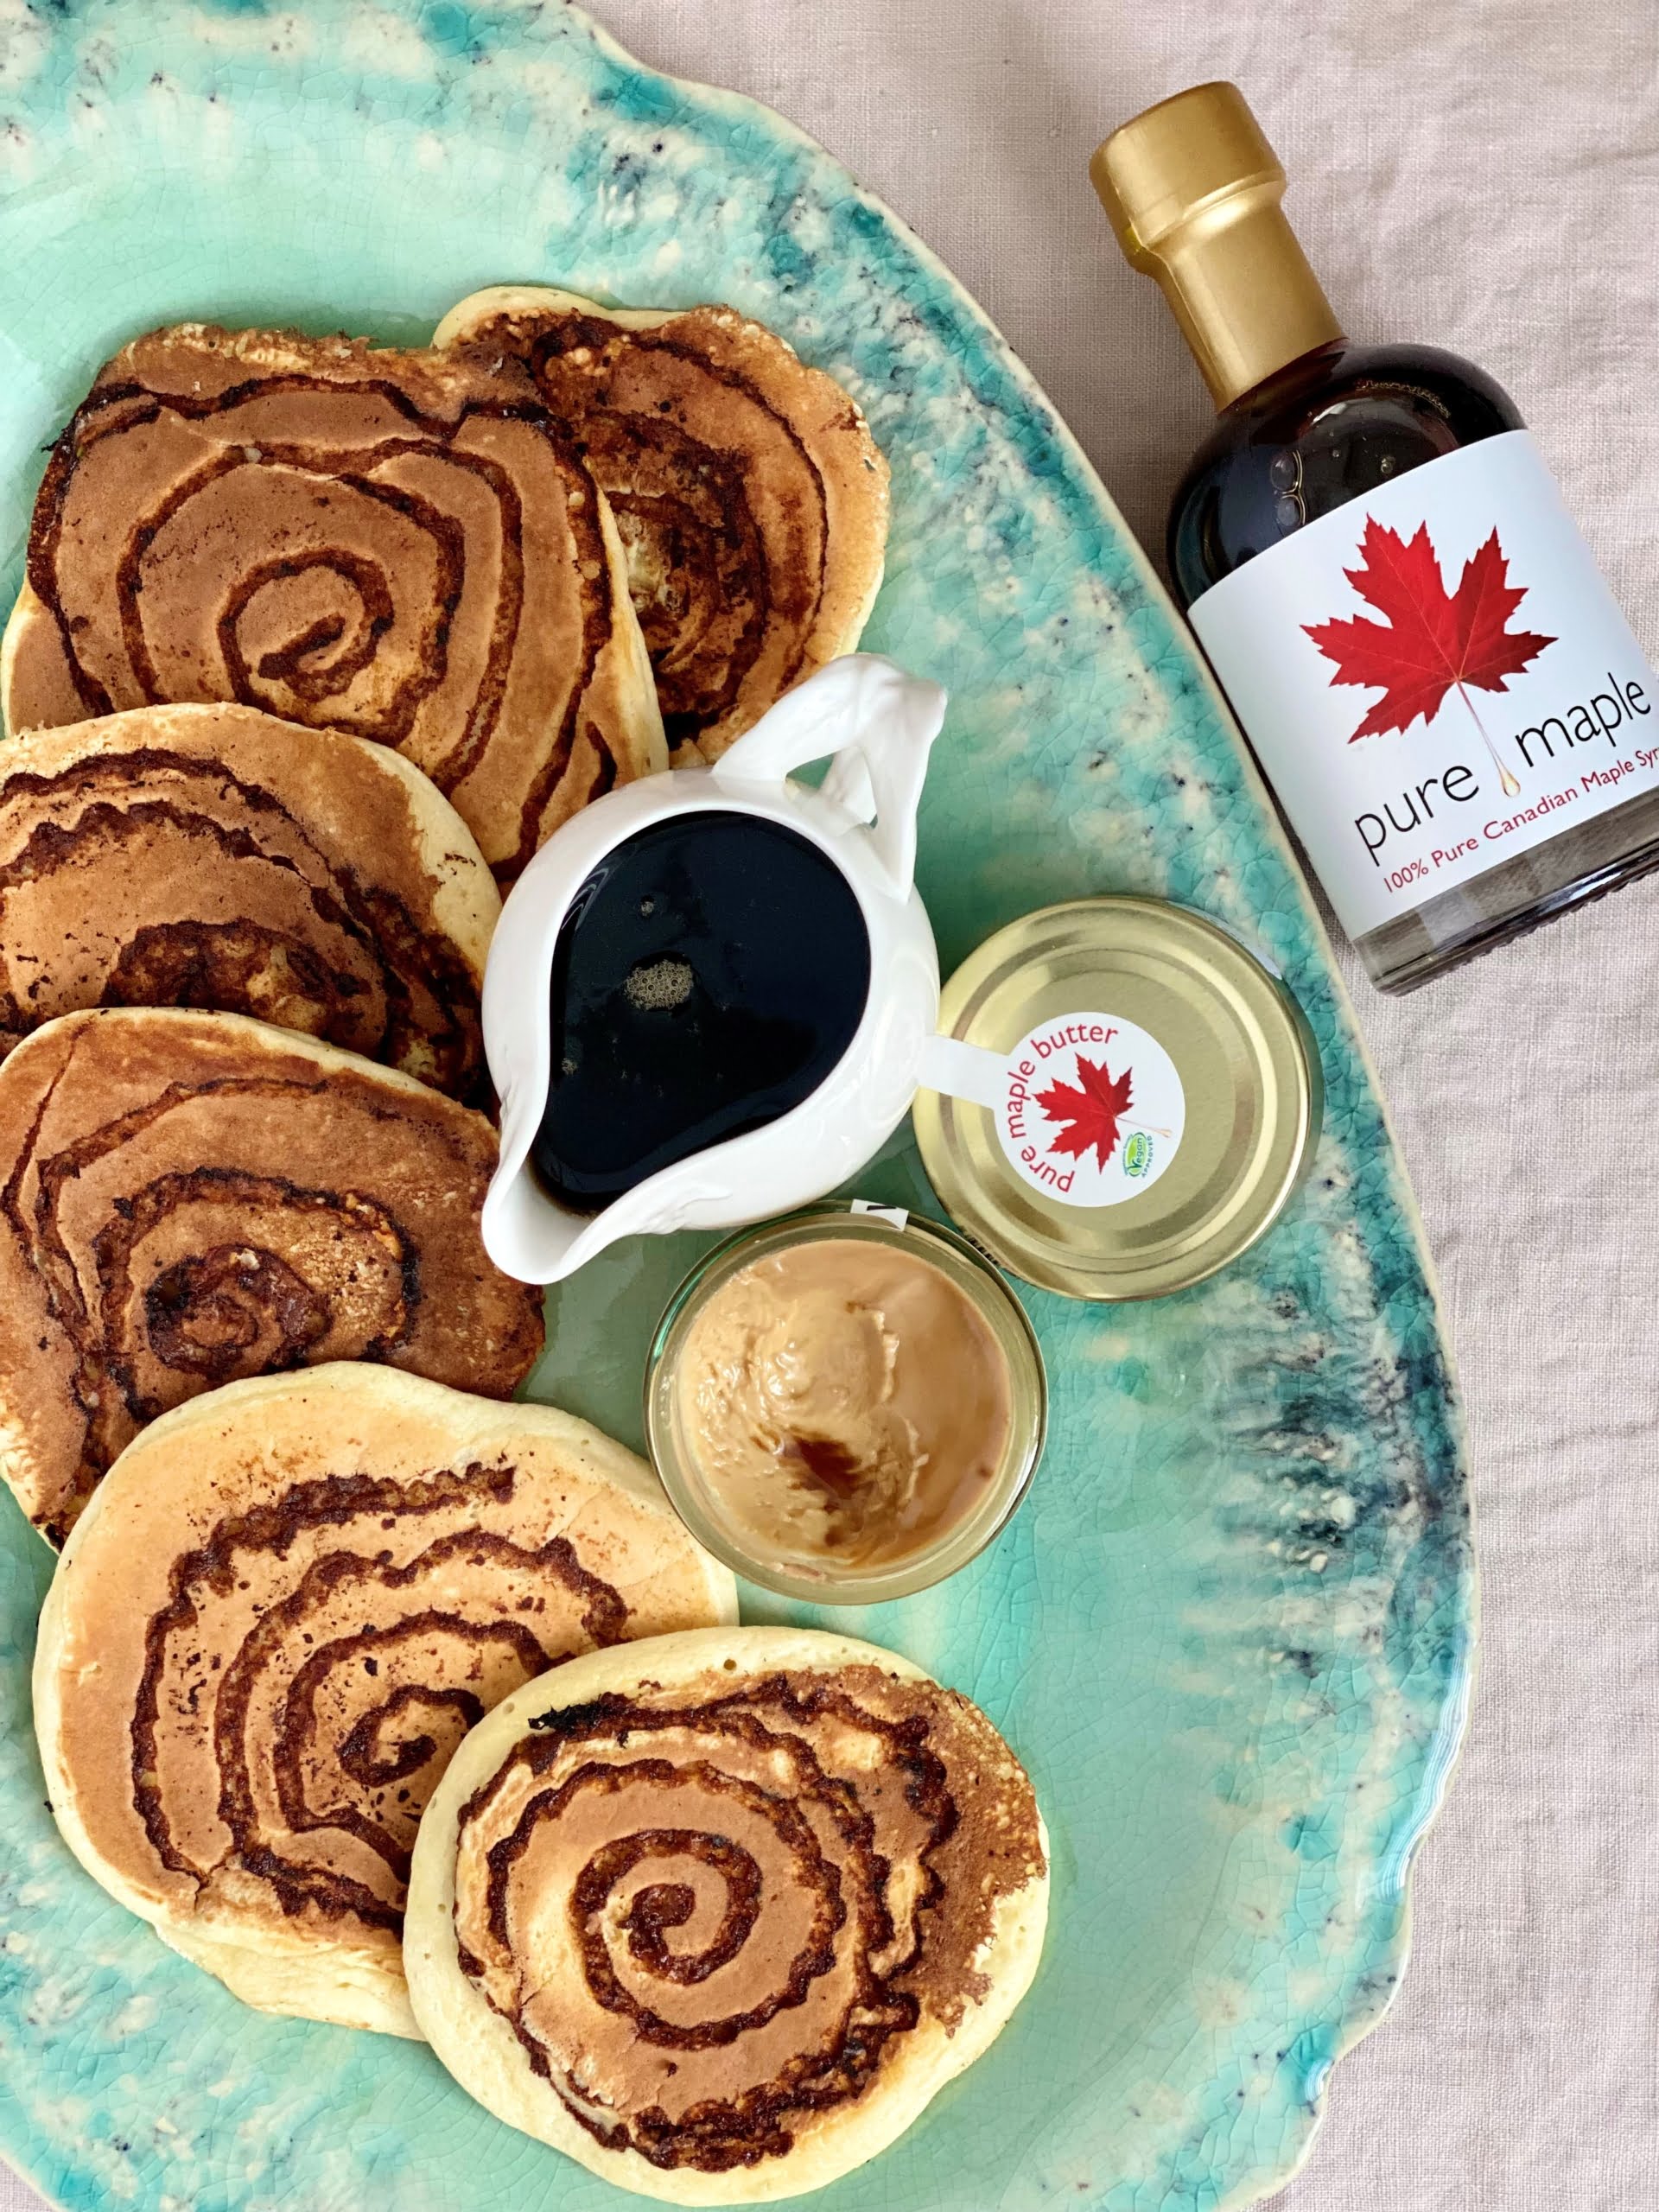 Platter with Maple and Cinnamon Swirl Pancakes served with maple butter and maple syrup - Pure Maple